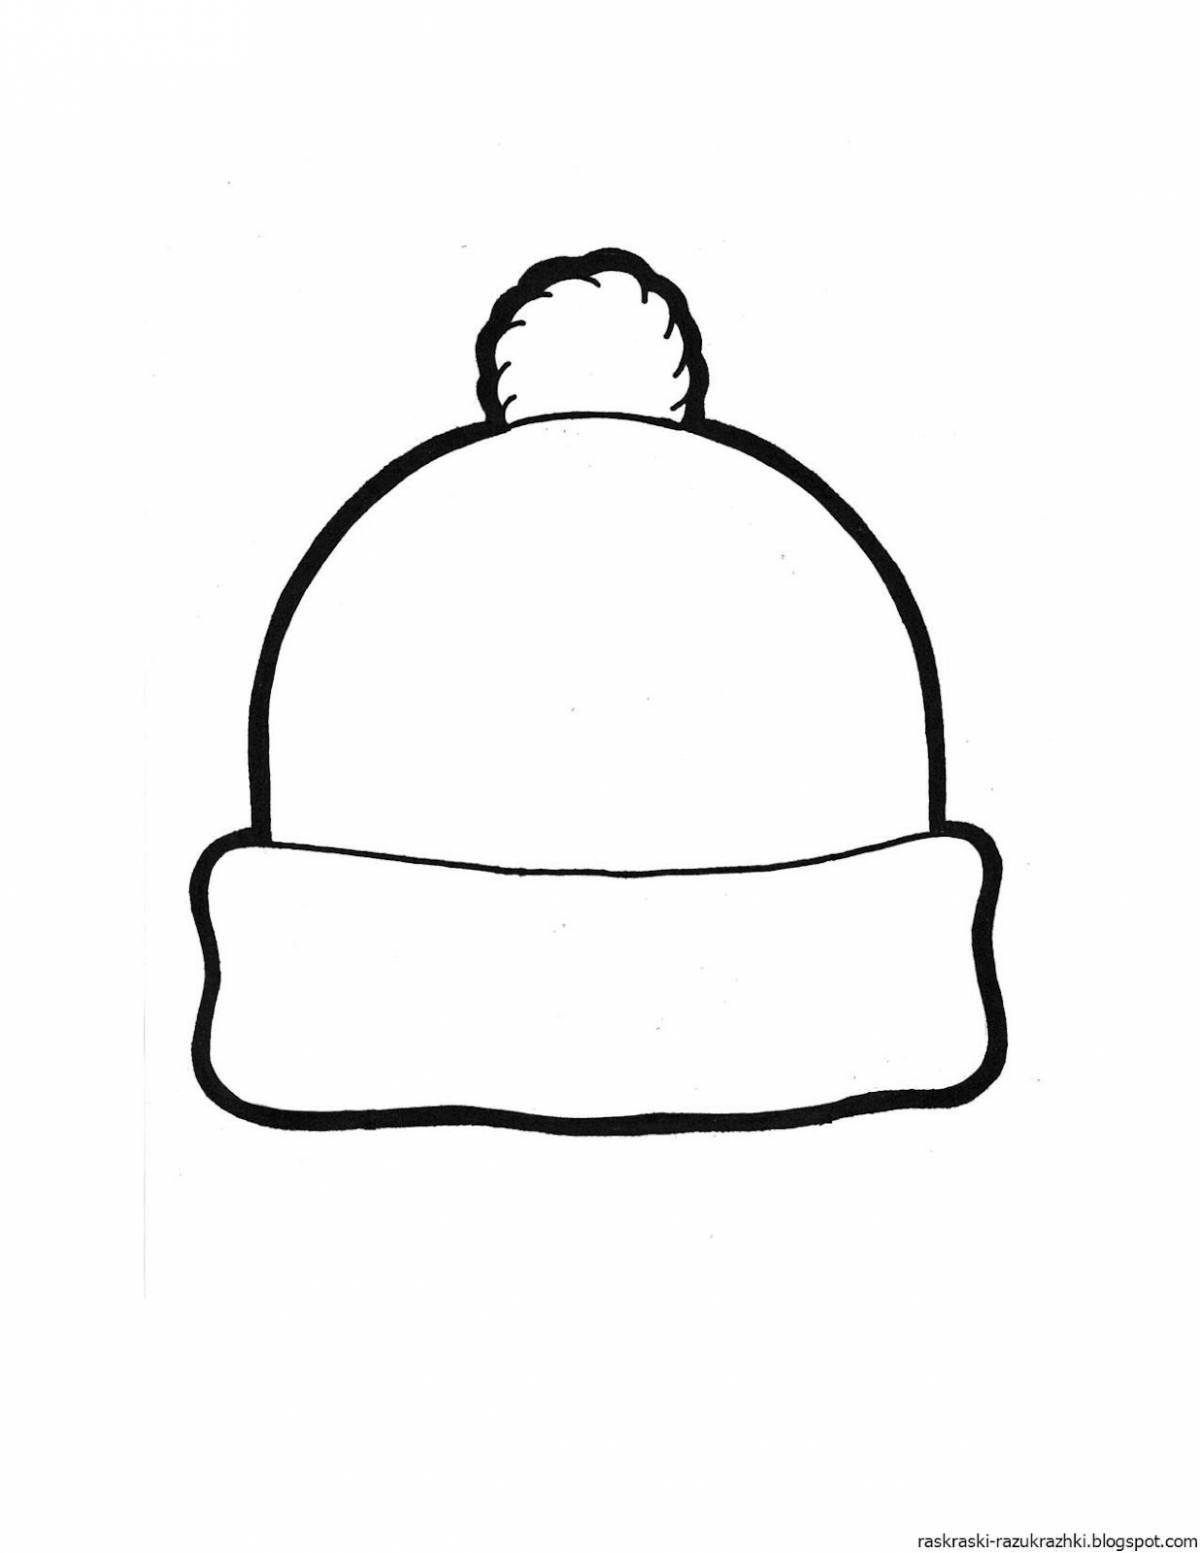 Coloring page magic winter hat for kids